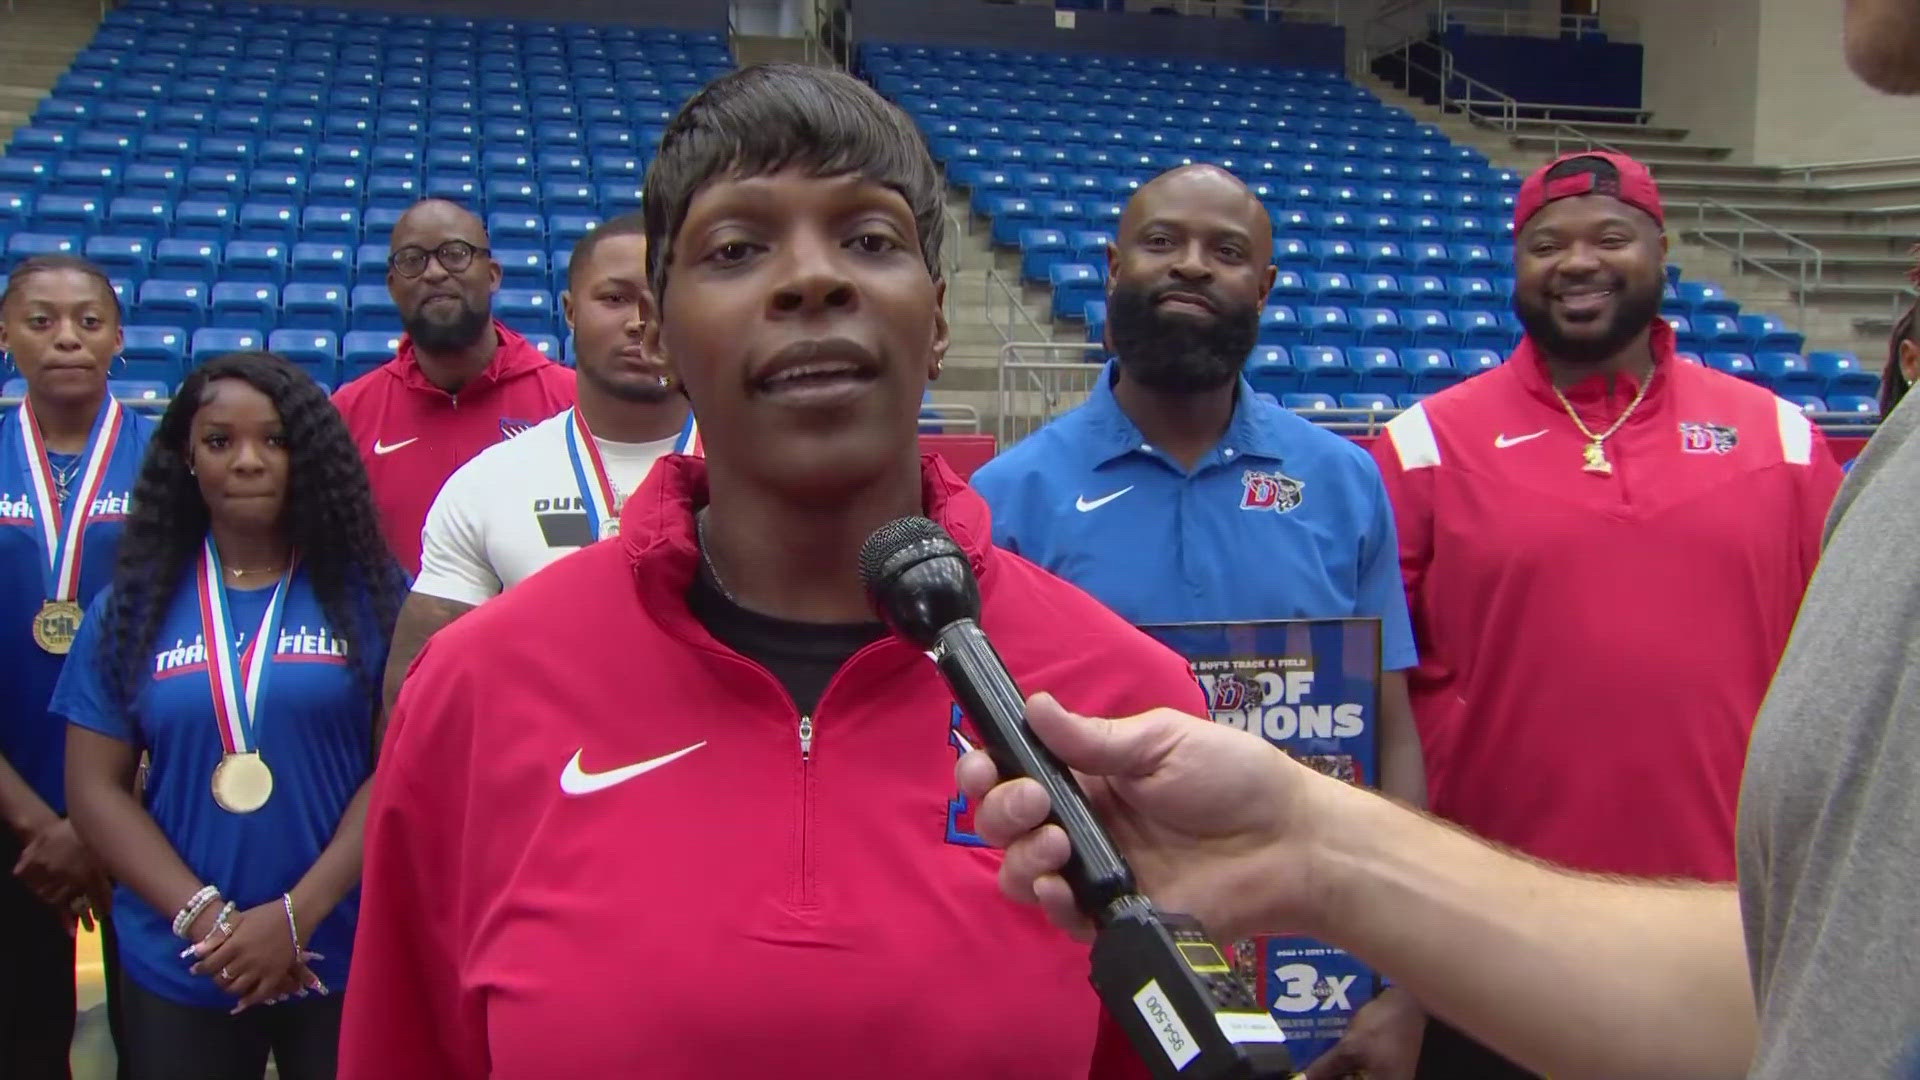 Coaches say expectations are high for Duncanville students.